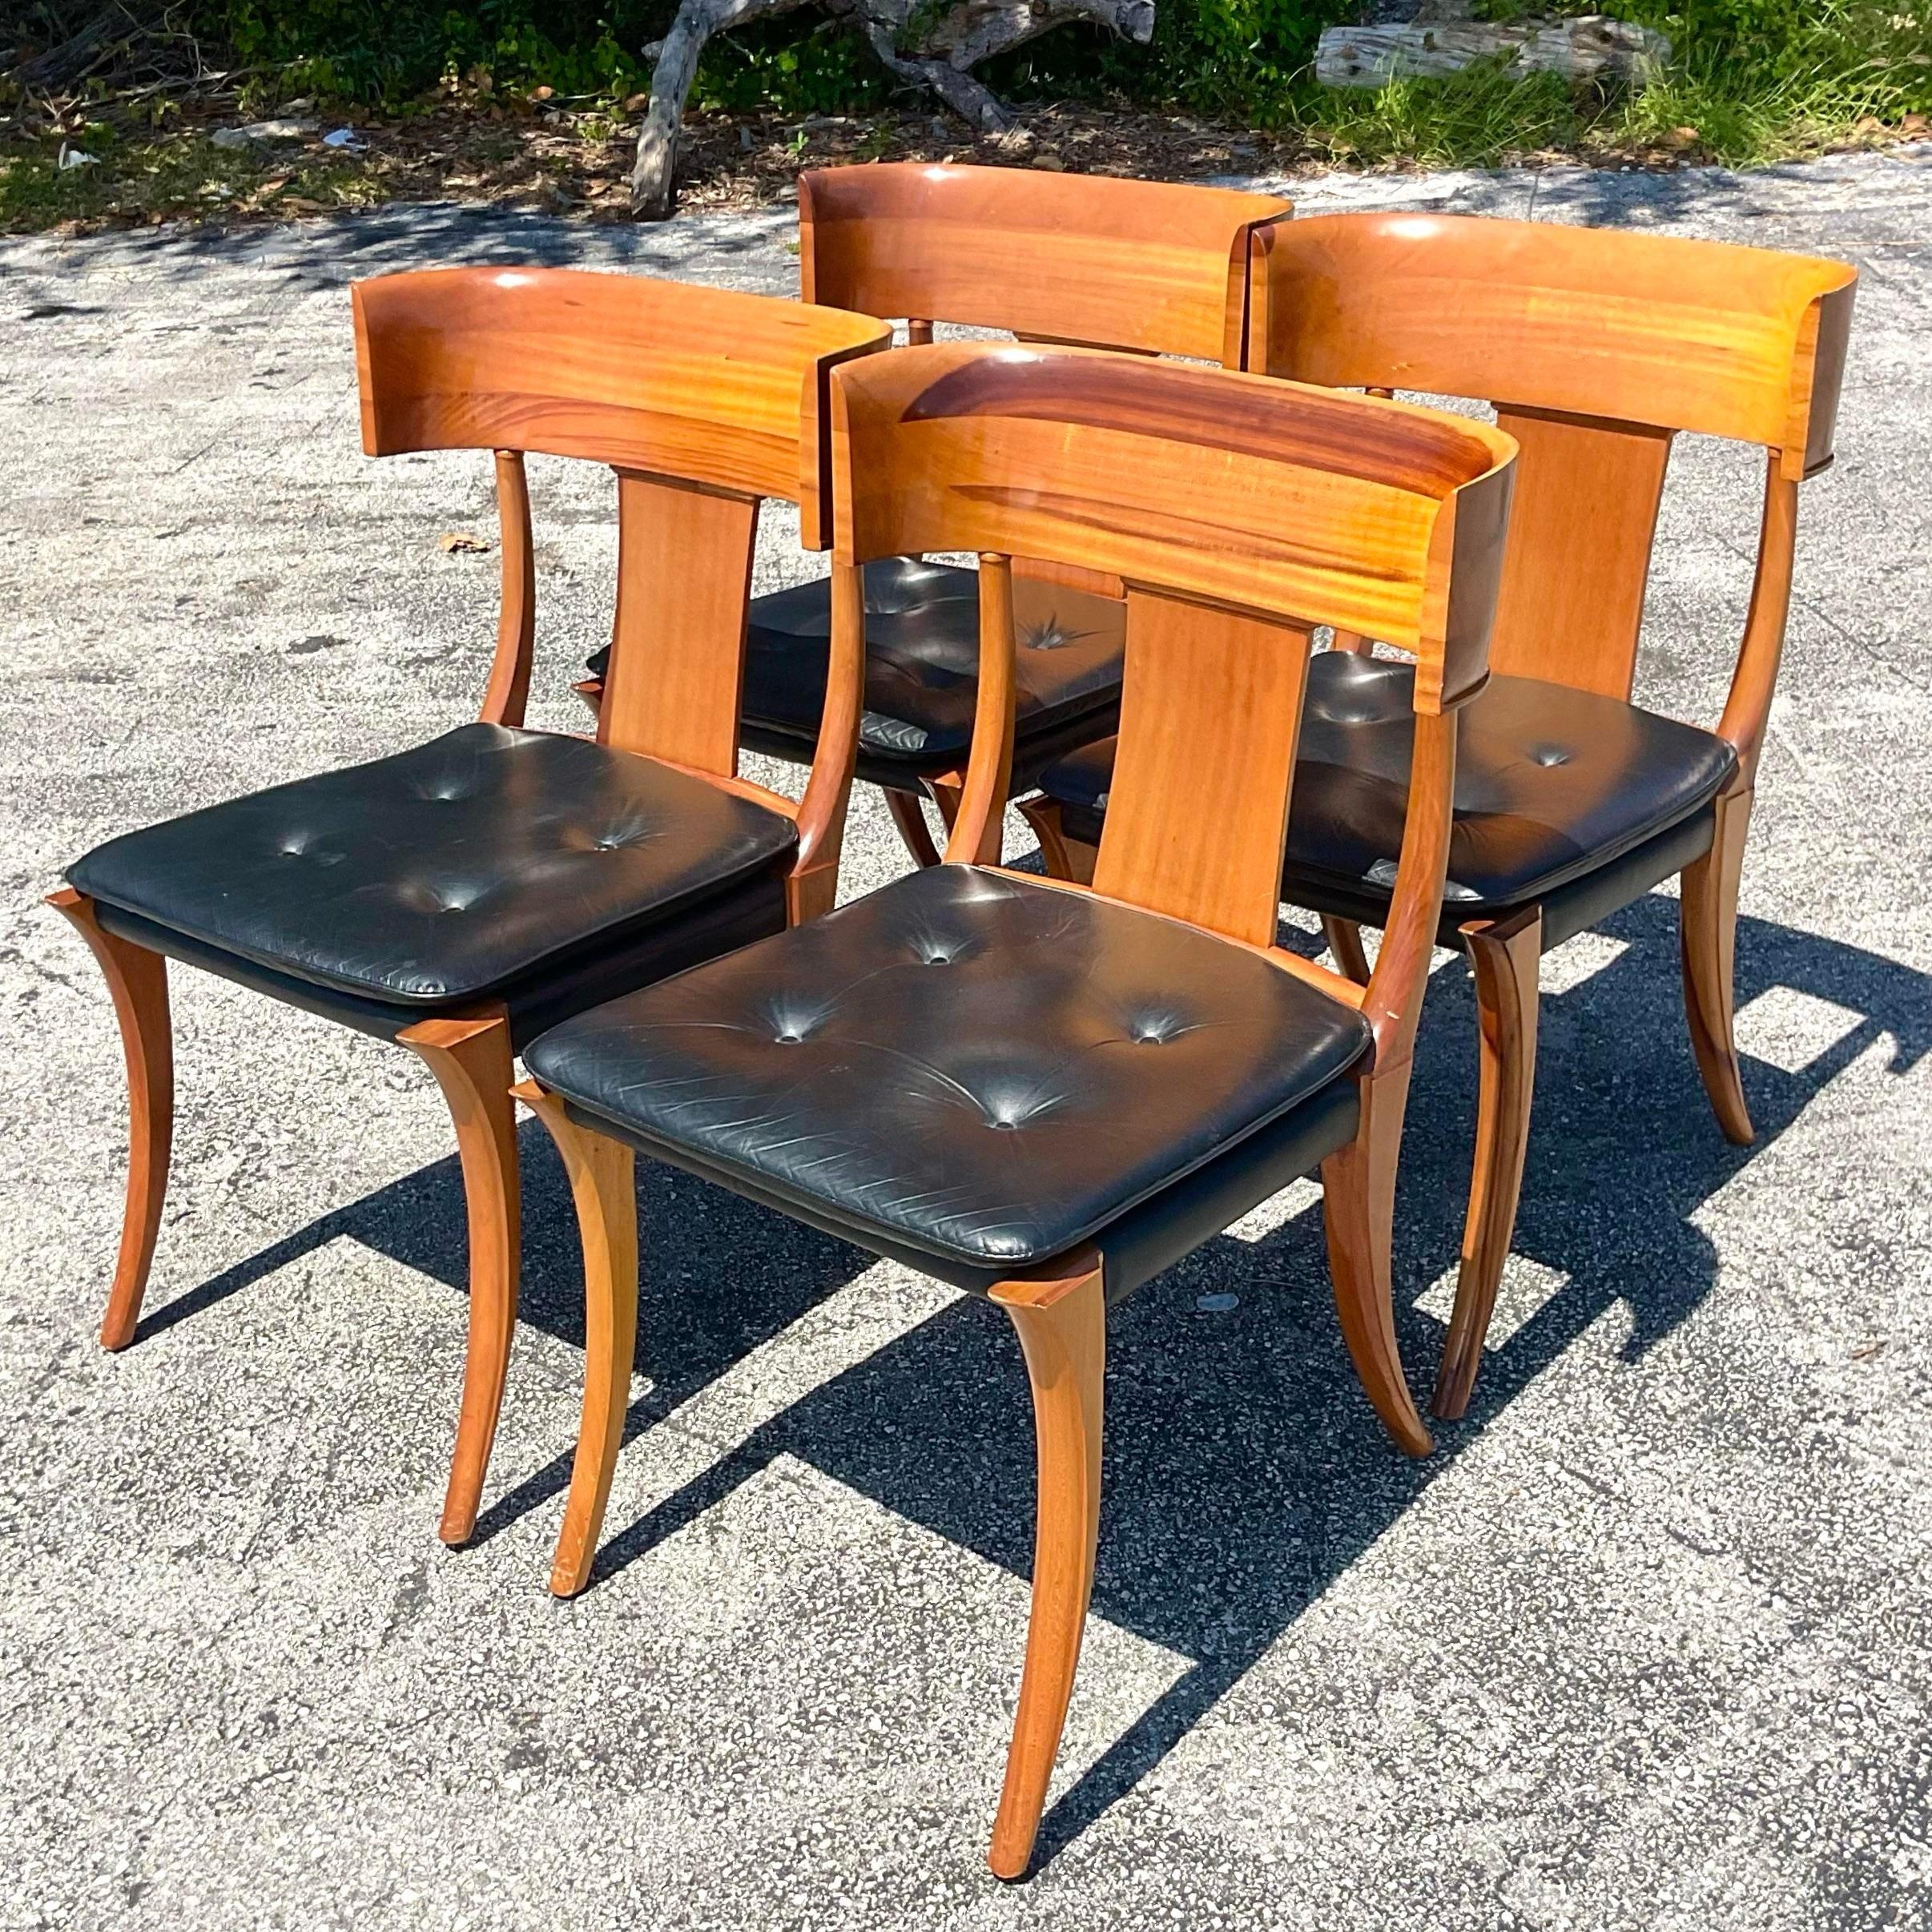 20th Century Vintage Neoclassical Klismos Dining Chairs After Kipp Stuart - Set of 4 For Sale